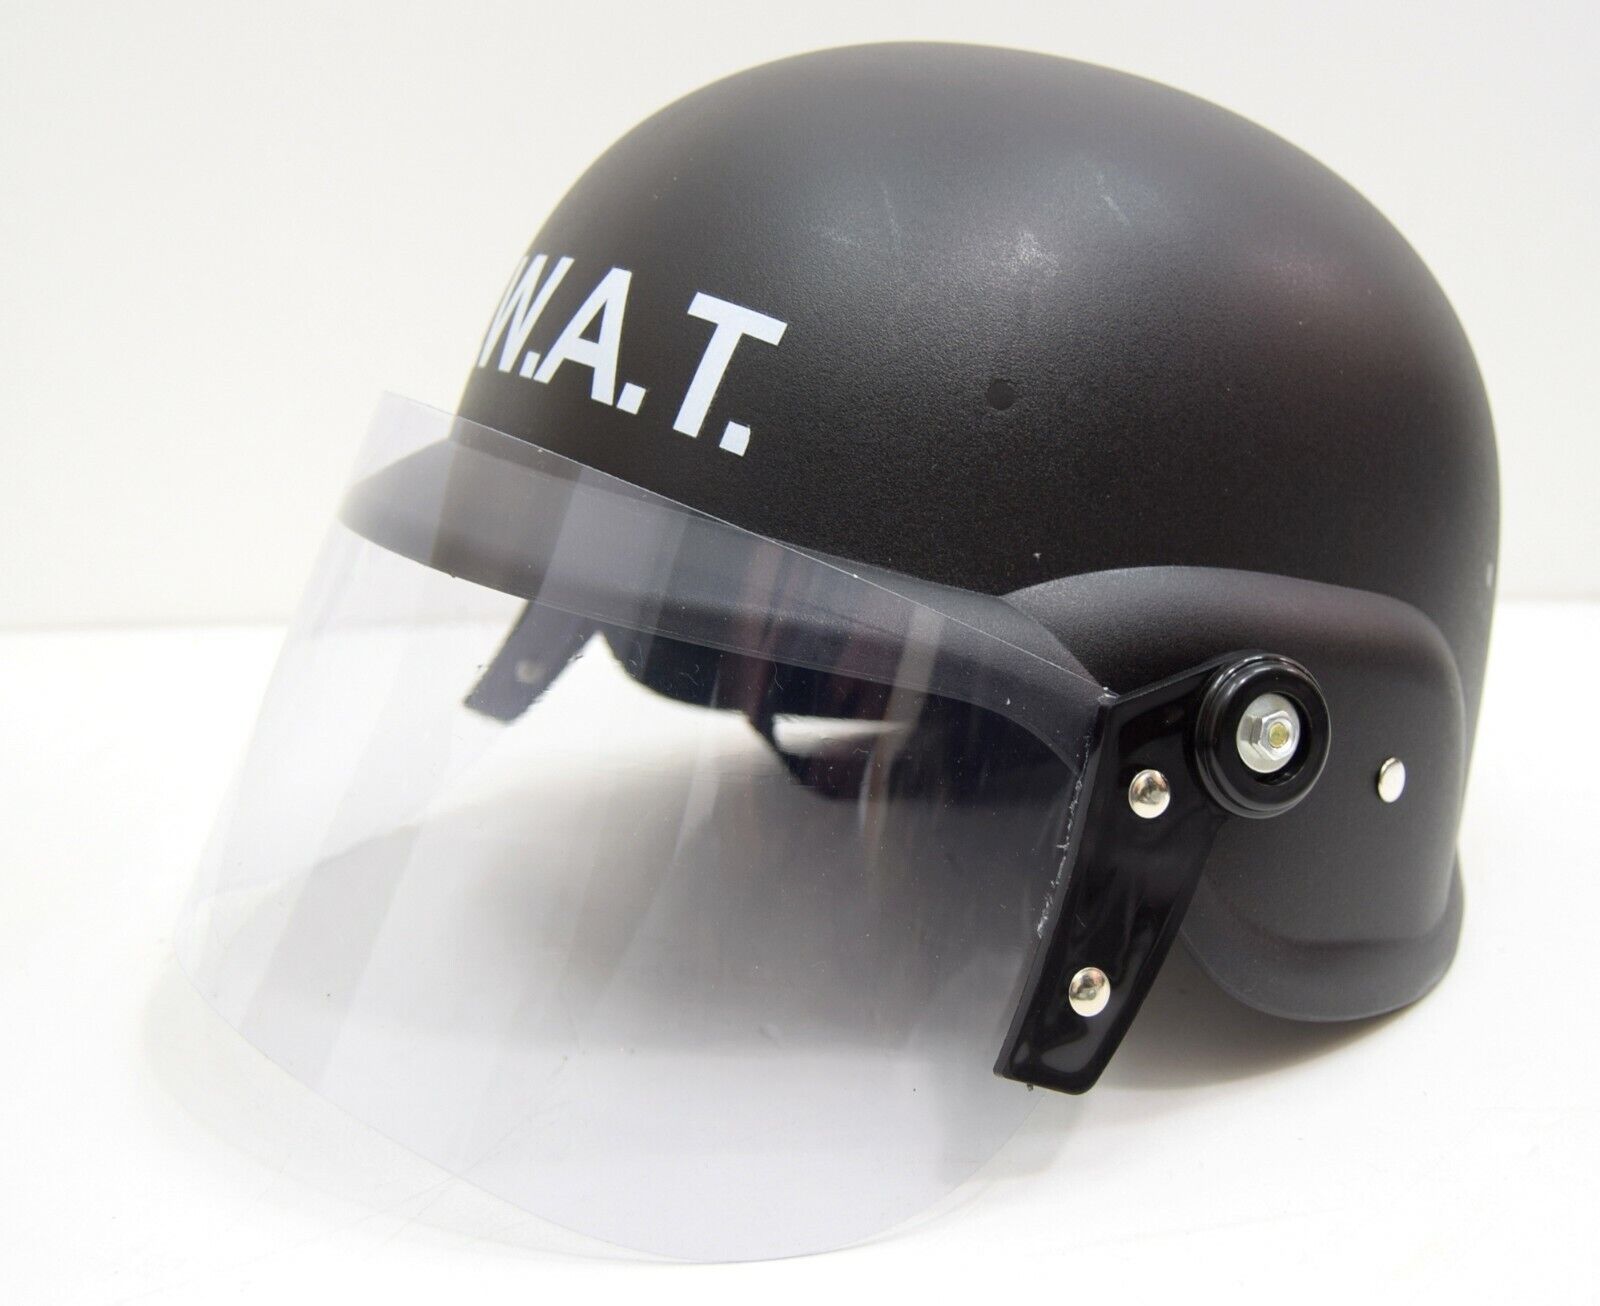 SWAT Style PASGT Plastic Helmet With Visor US Military Police Repro Black M88 